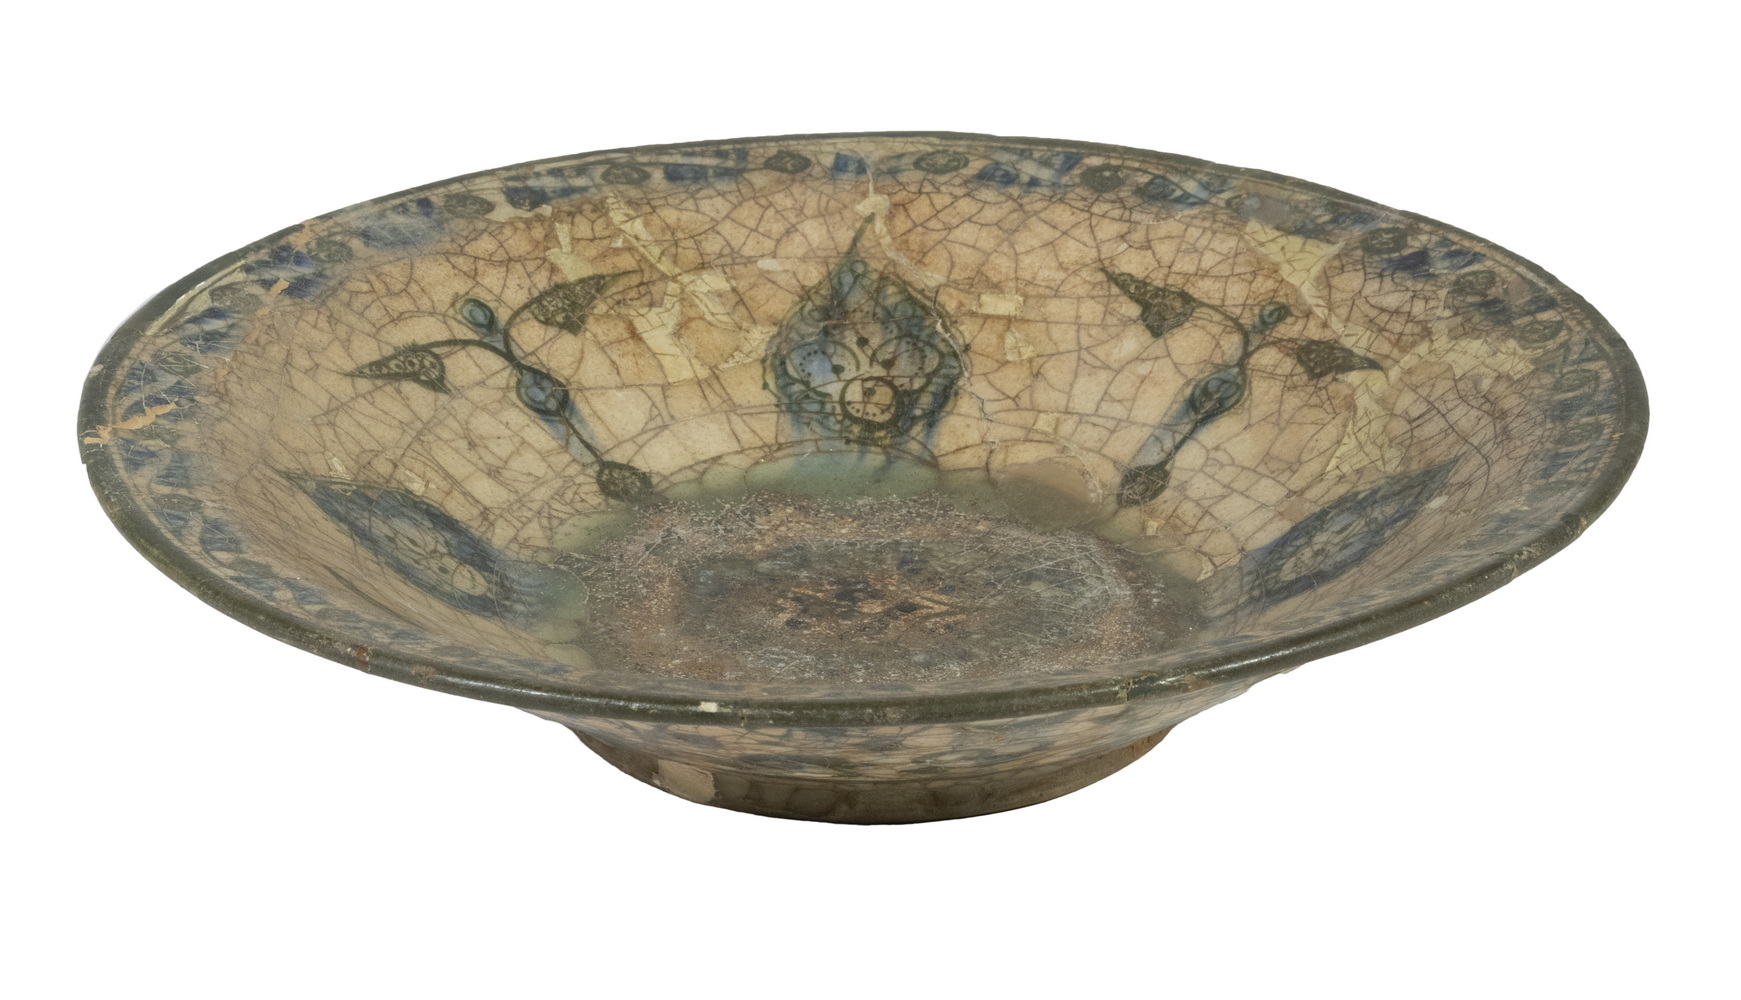 EARLY PERSIAN POTTERY BOWL Glazed Fritware